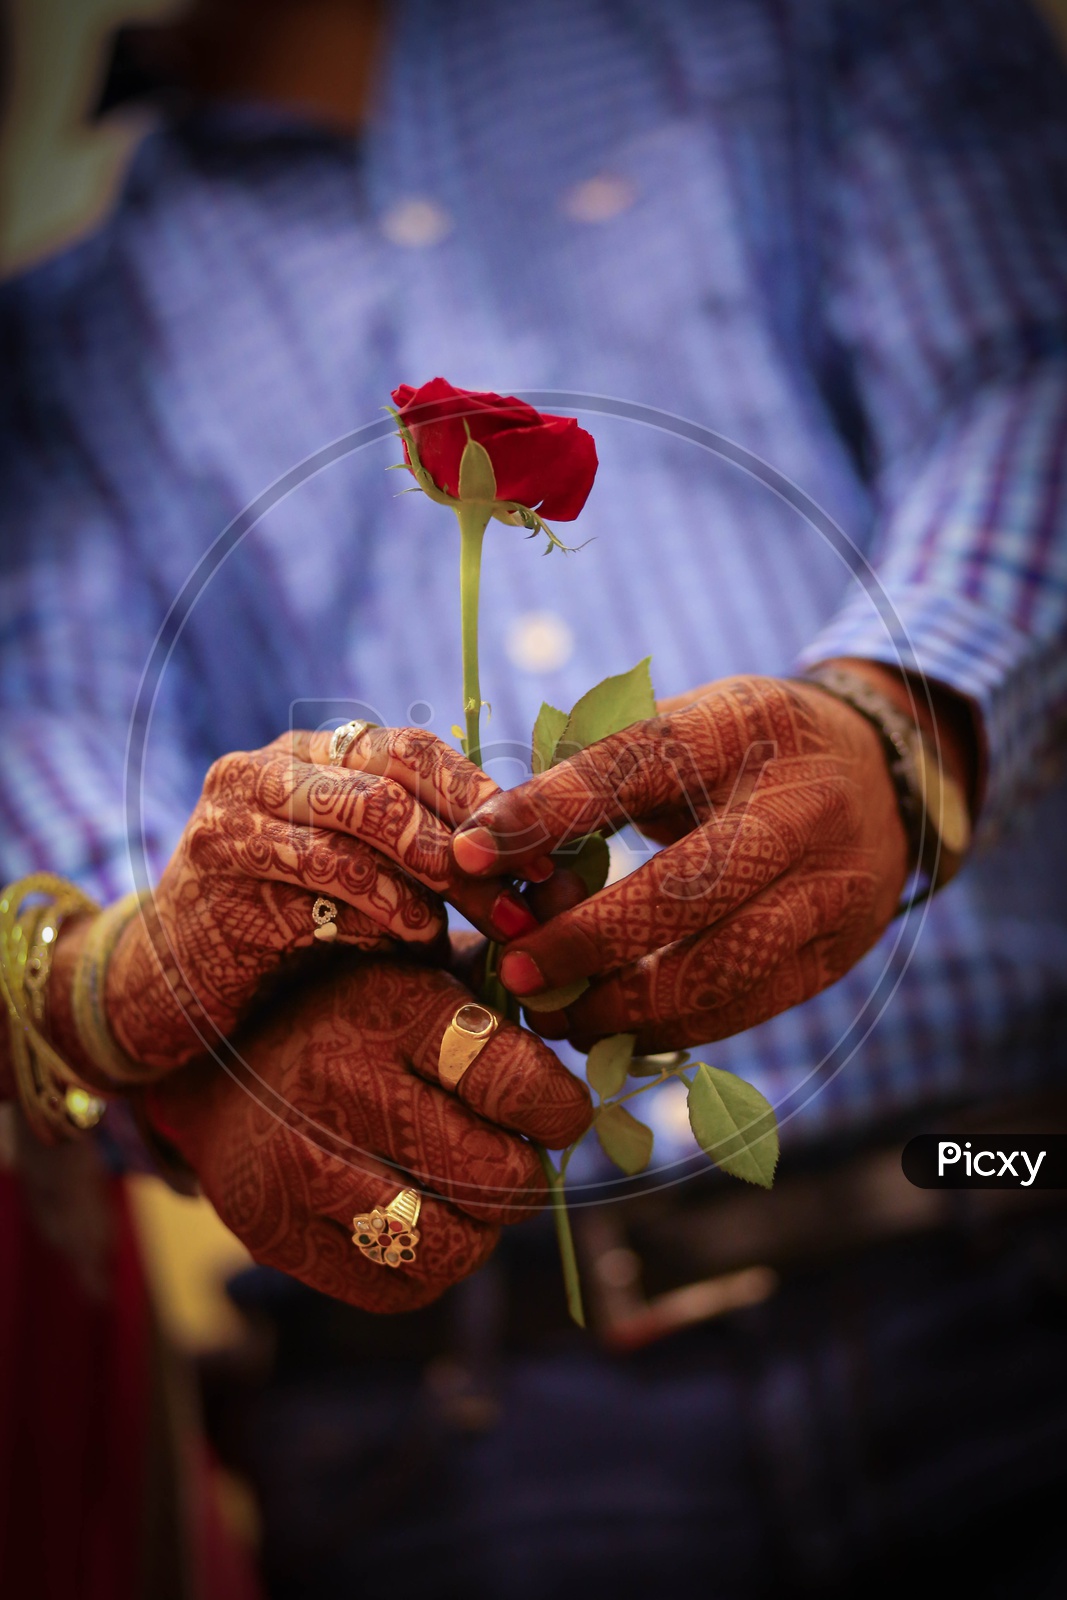 Couple Hands Closeup Shot With Red Rose Holding In Their Hand